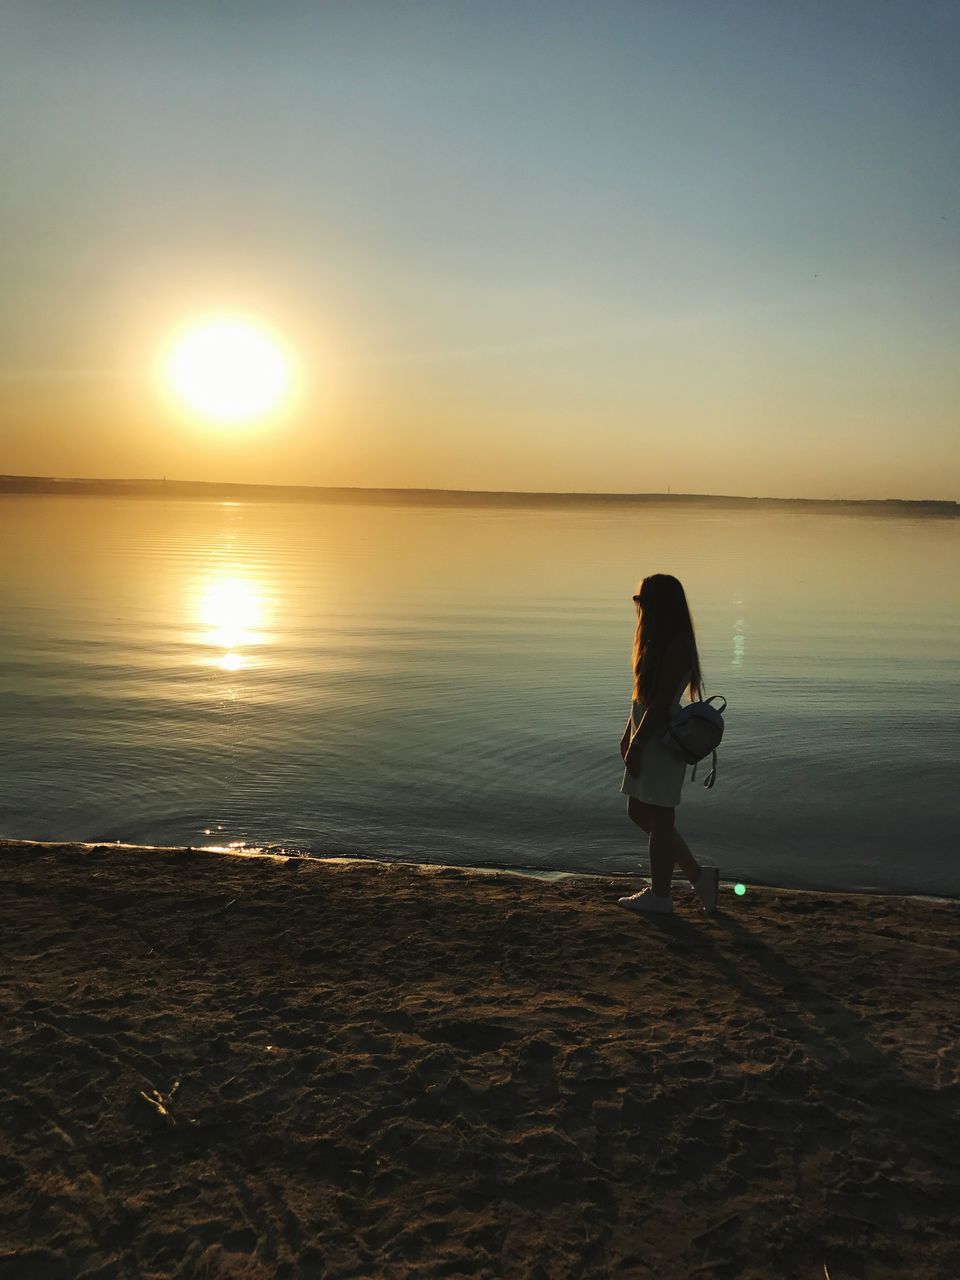 sunset, beach, nature, reflection, water, sea, sun, beauty in nature, scenics, full length, one person, tranquility, tranquil scene, sand, sky, standing, sunlight, horizon over water, leisure activity, real people, side view, silhouette, outdoors, lifestyles, women, young adult, day, people